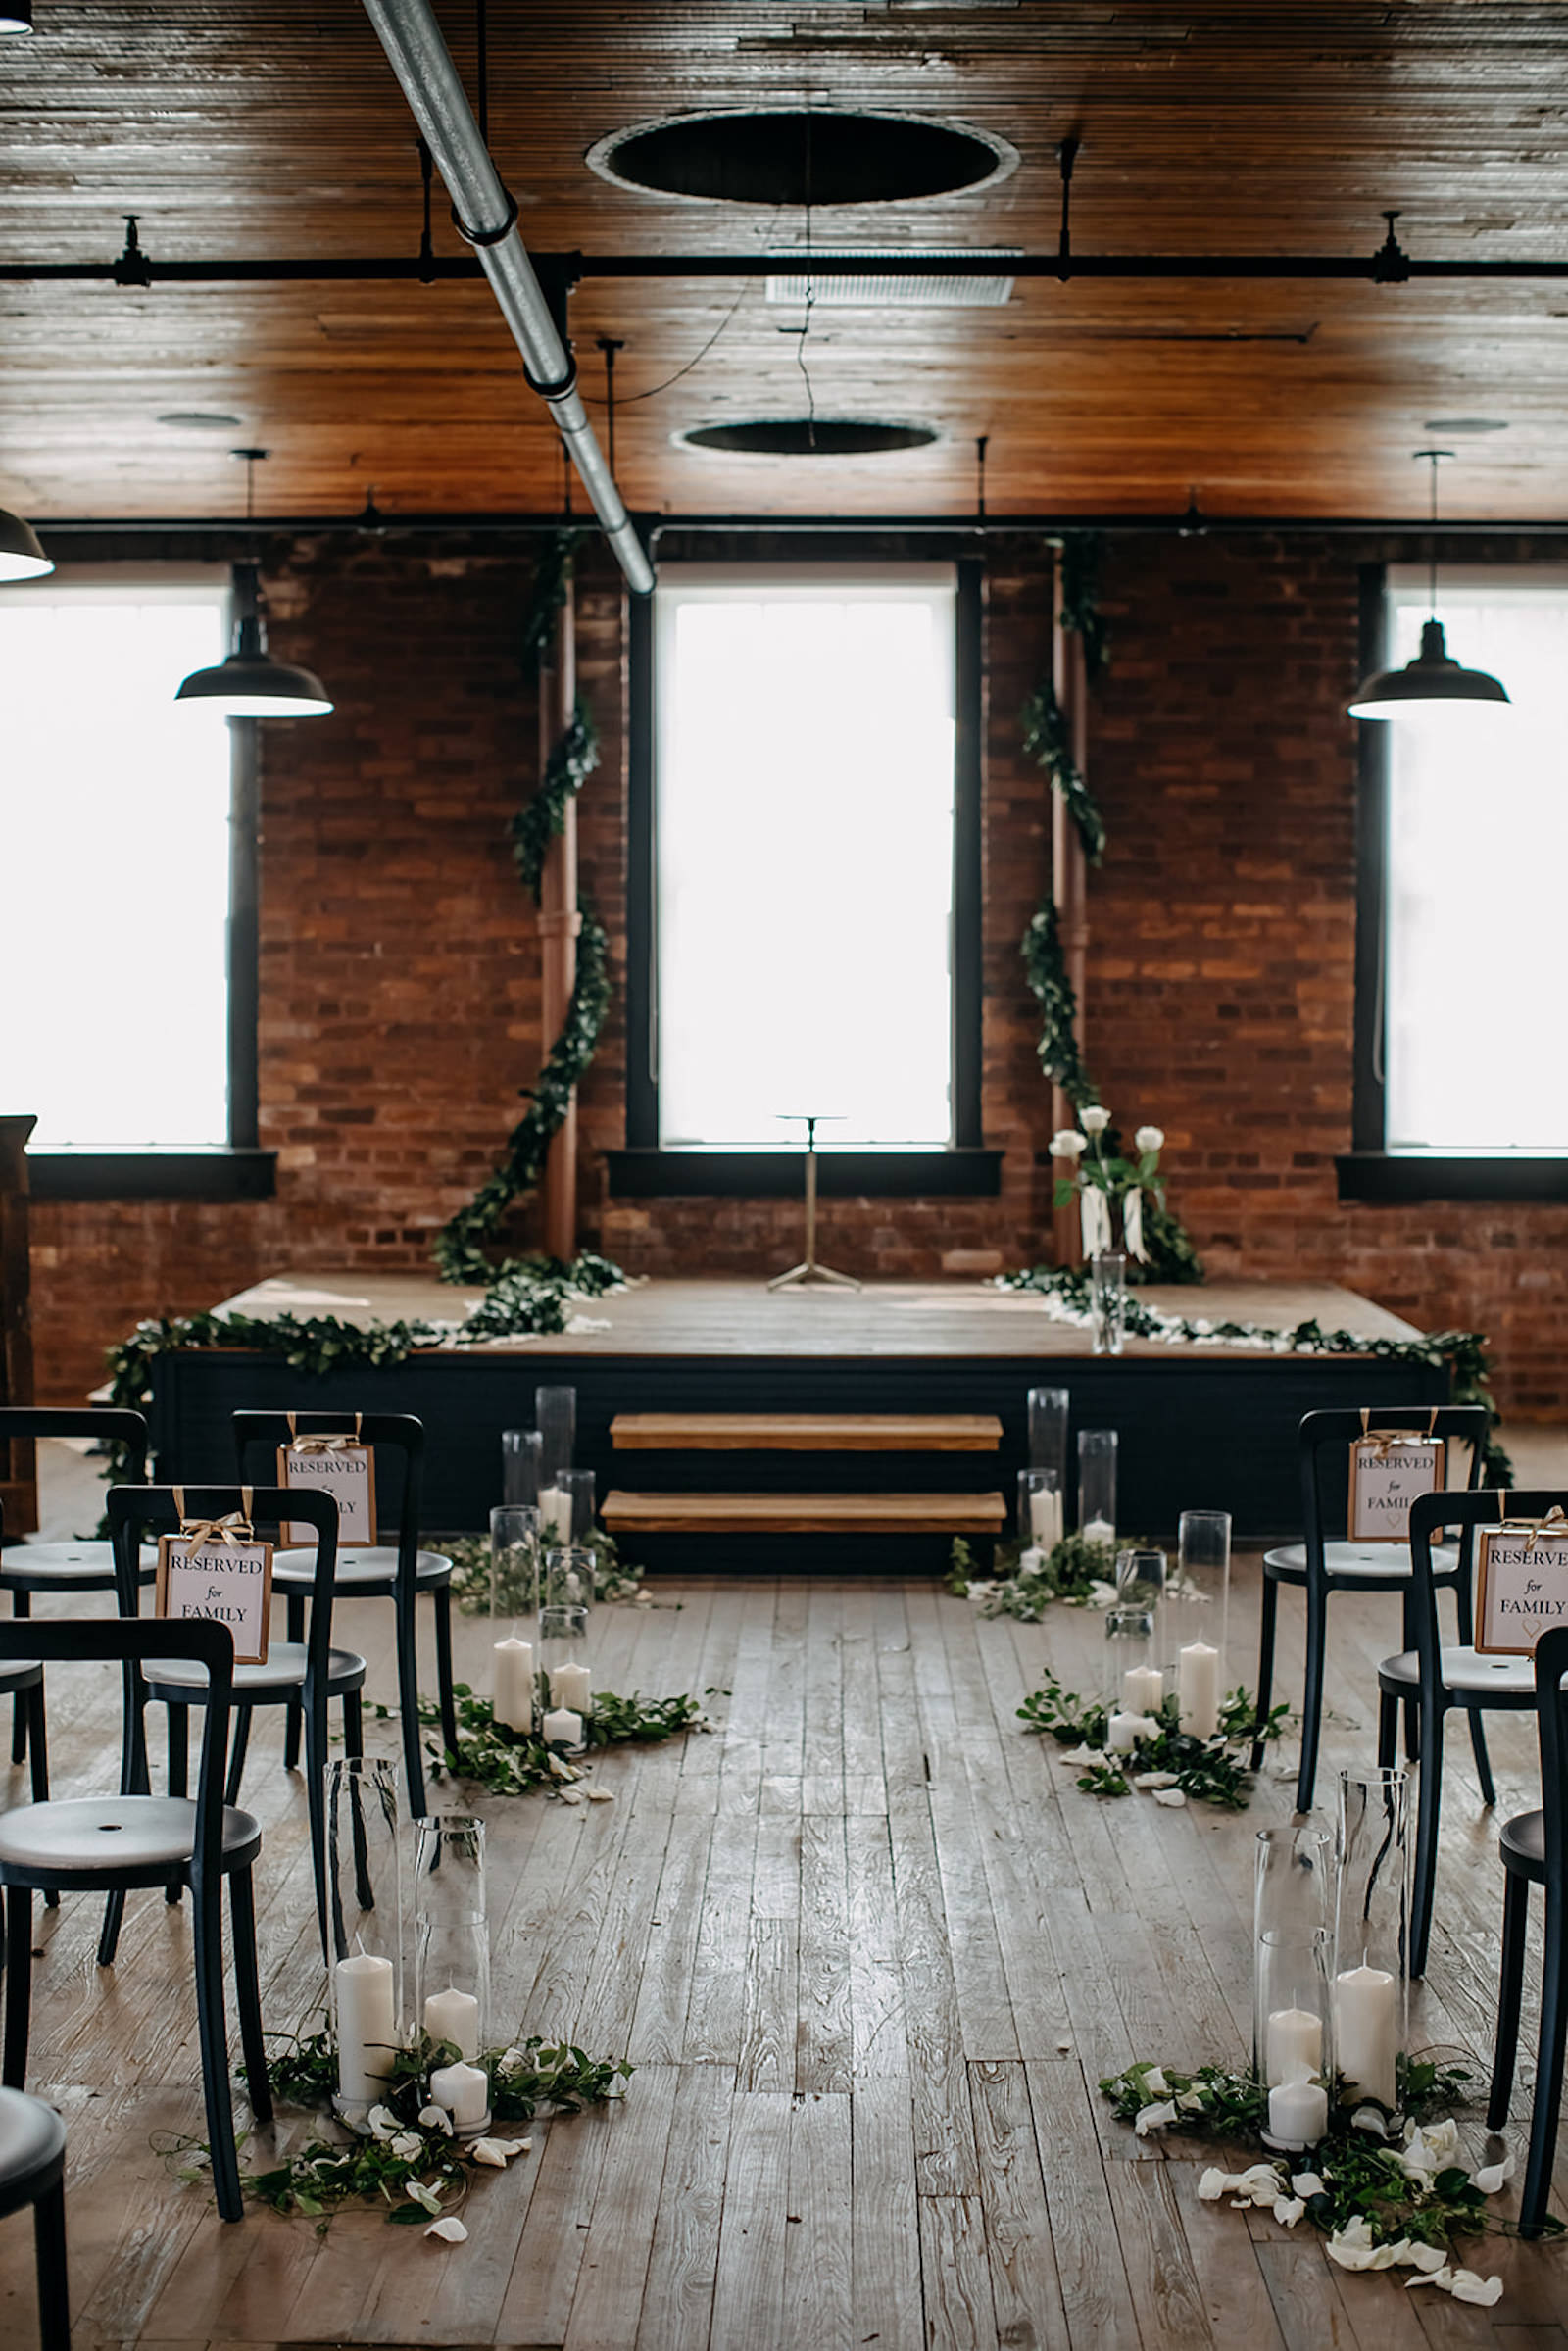 Vintage Inspired Tampa Bay Wedding Ceremony Decor, Simplisitic Brick Exposed Industrial venue, Metal Black Chairs, decorated with Candles, White Rose Petals, and Greenery, Ivy and Vines Wrapped Around Staircase | Unique Florida Wedding Venue J.C. Newman Cigar Co. in Ybor City